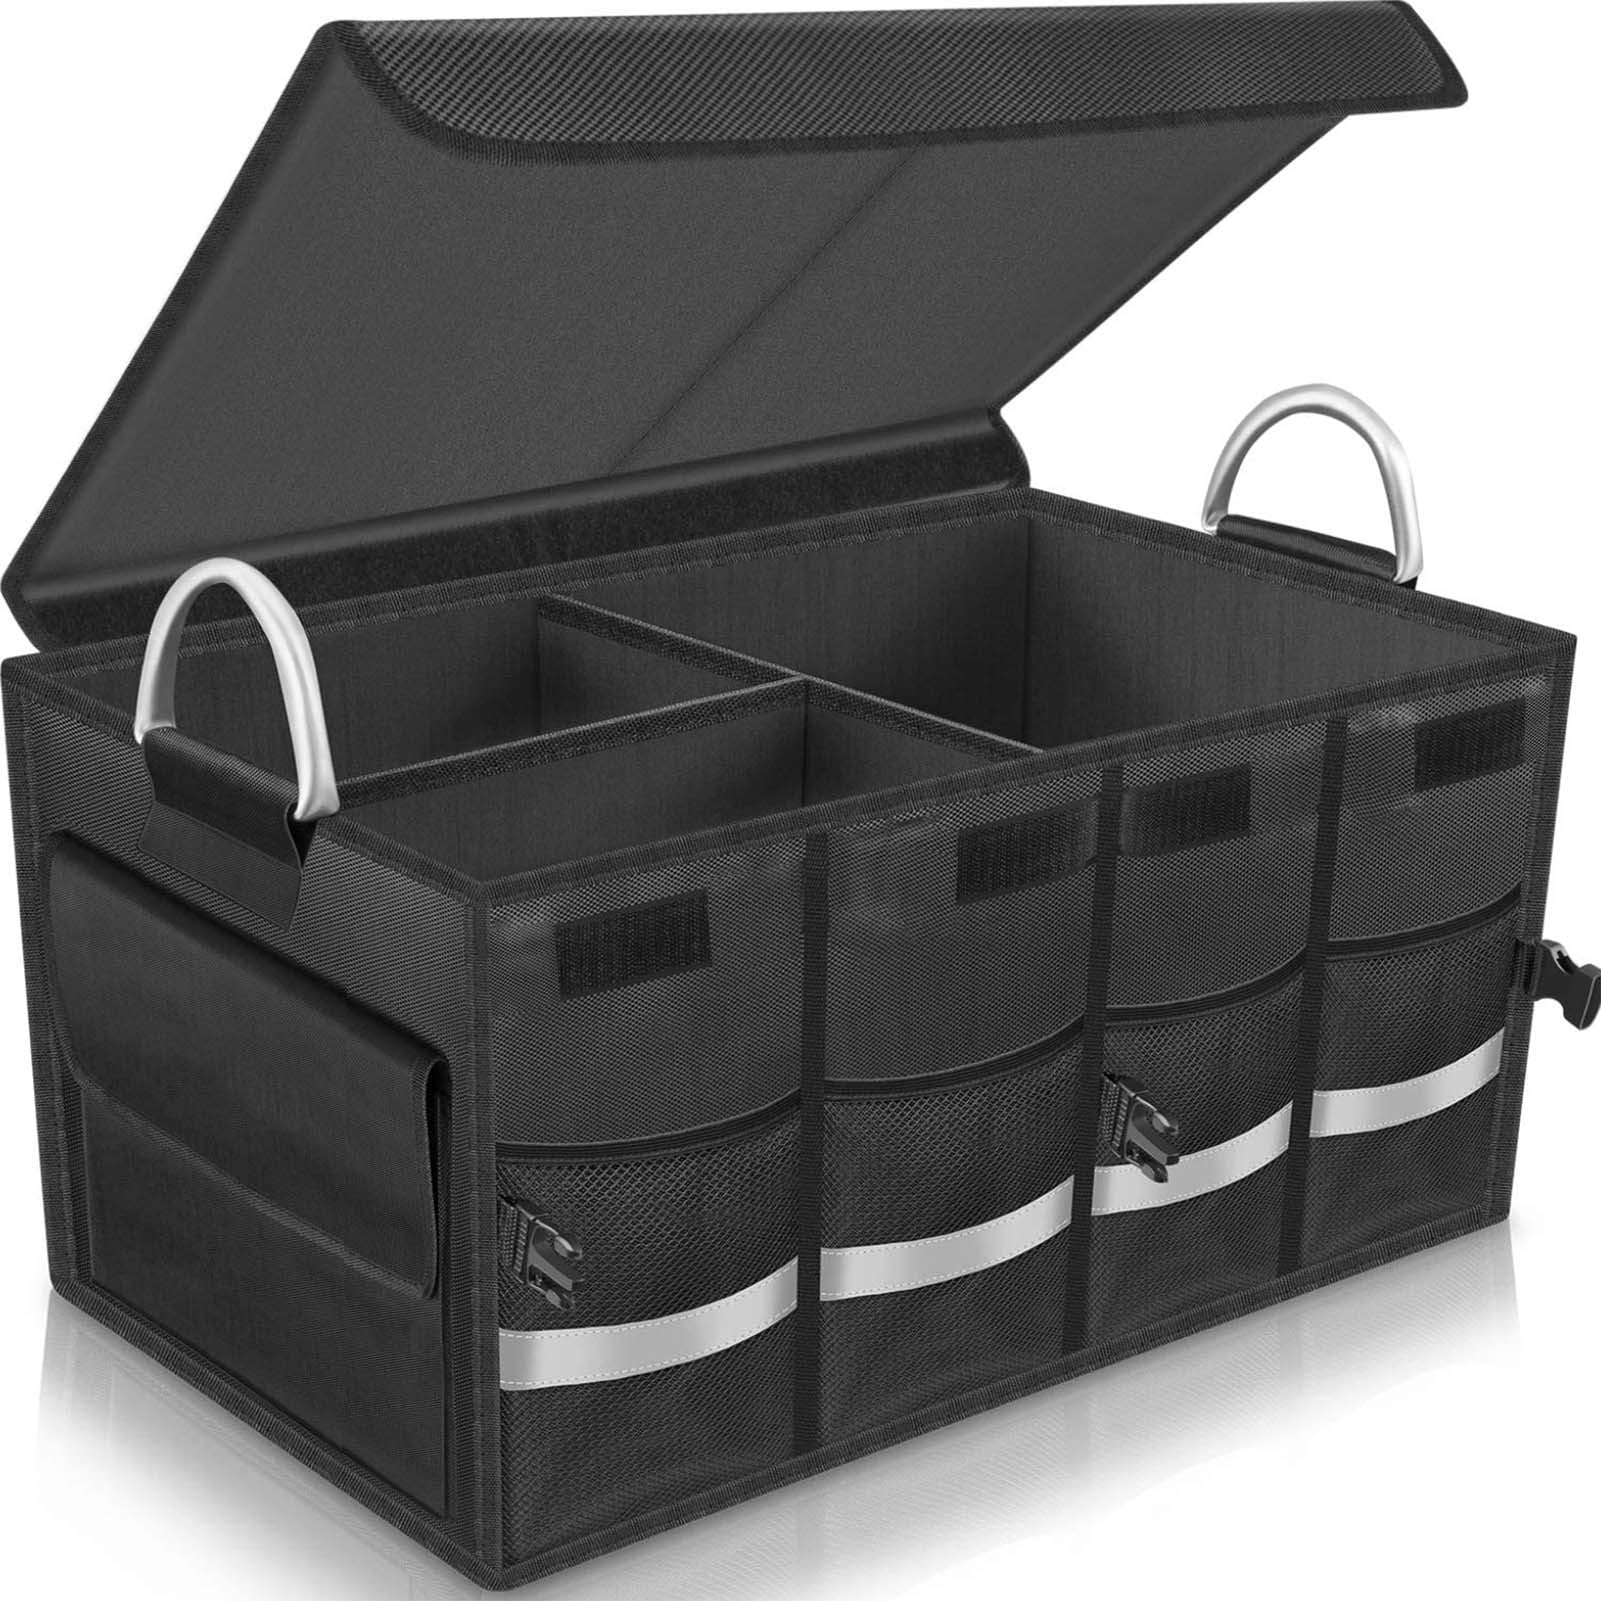 Car Trunk Organizer, Waterproof Foldable Portable Multifunctional Storage  Box, Tool Grocery Bag Organizer, Suitable for X1 X3 X5 E30 – the best  products in the Joom Geek online store